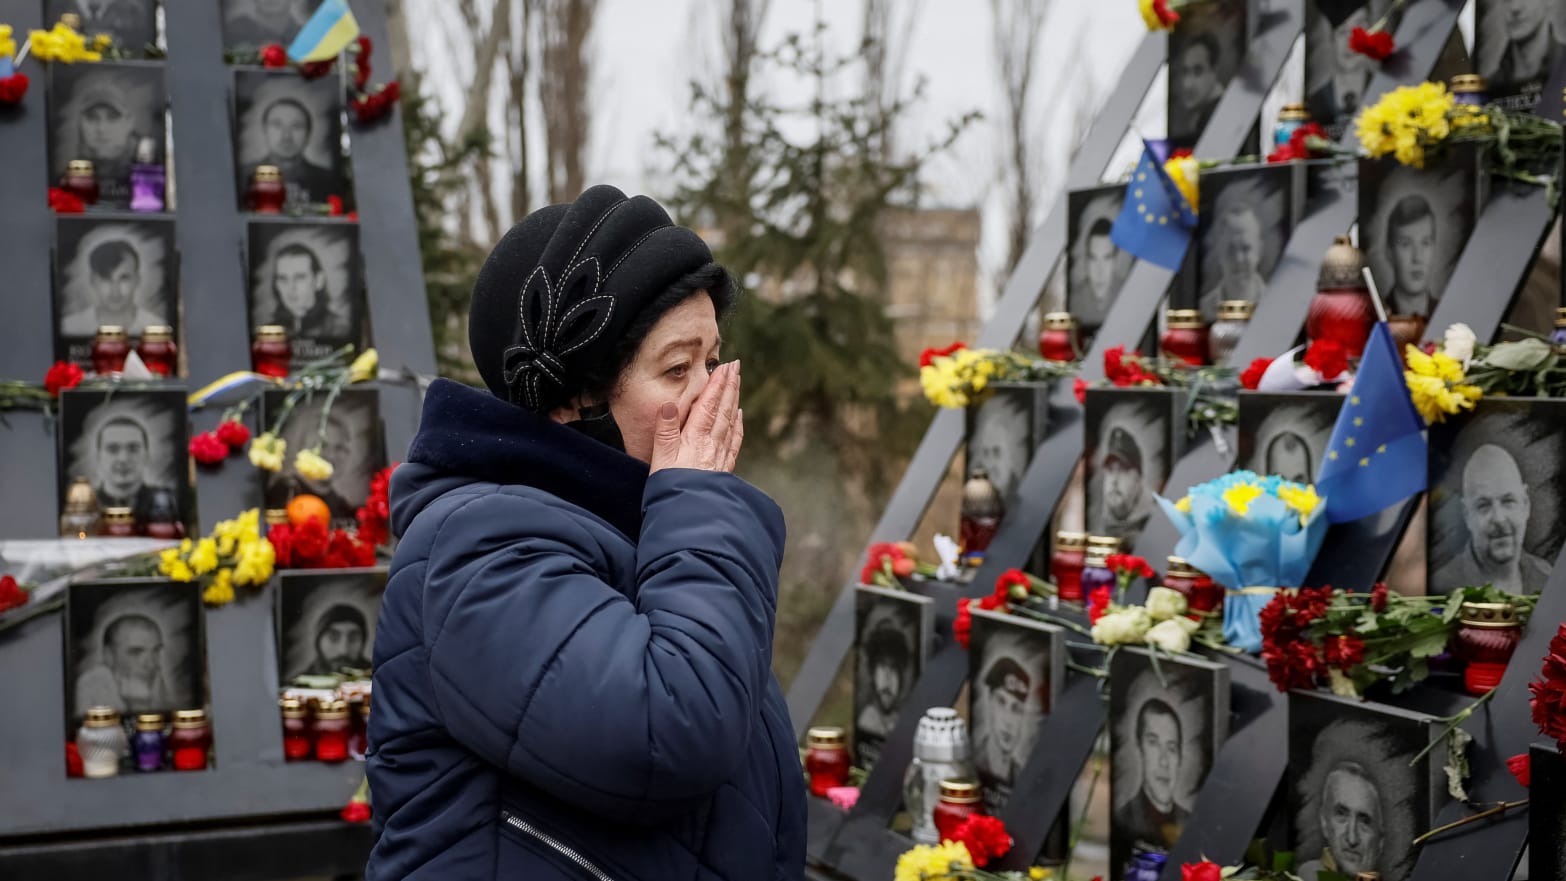 A woman reacts as she visits at a monument to the so-called \"Heavenly Hundred\", the people killed during the Ukrainian pro-European Union (EU) mass demonstrations in 2014, to mark the tenth anniversary of the end of the uprising.